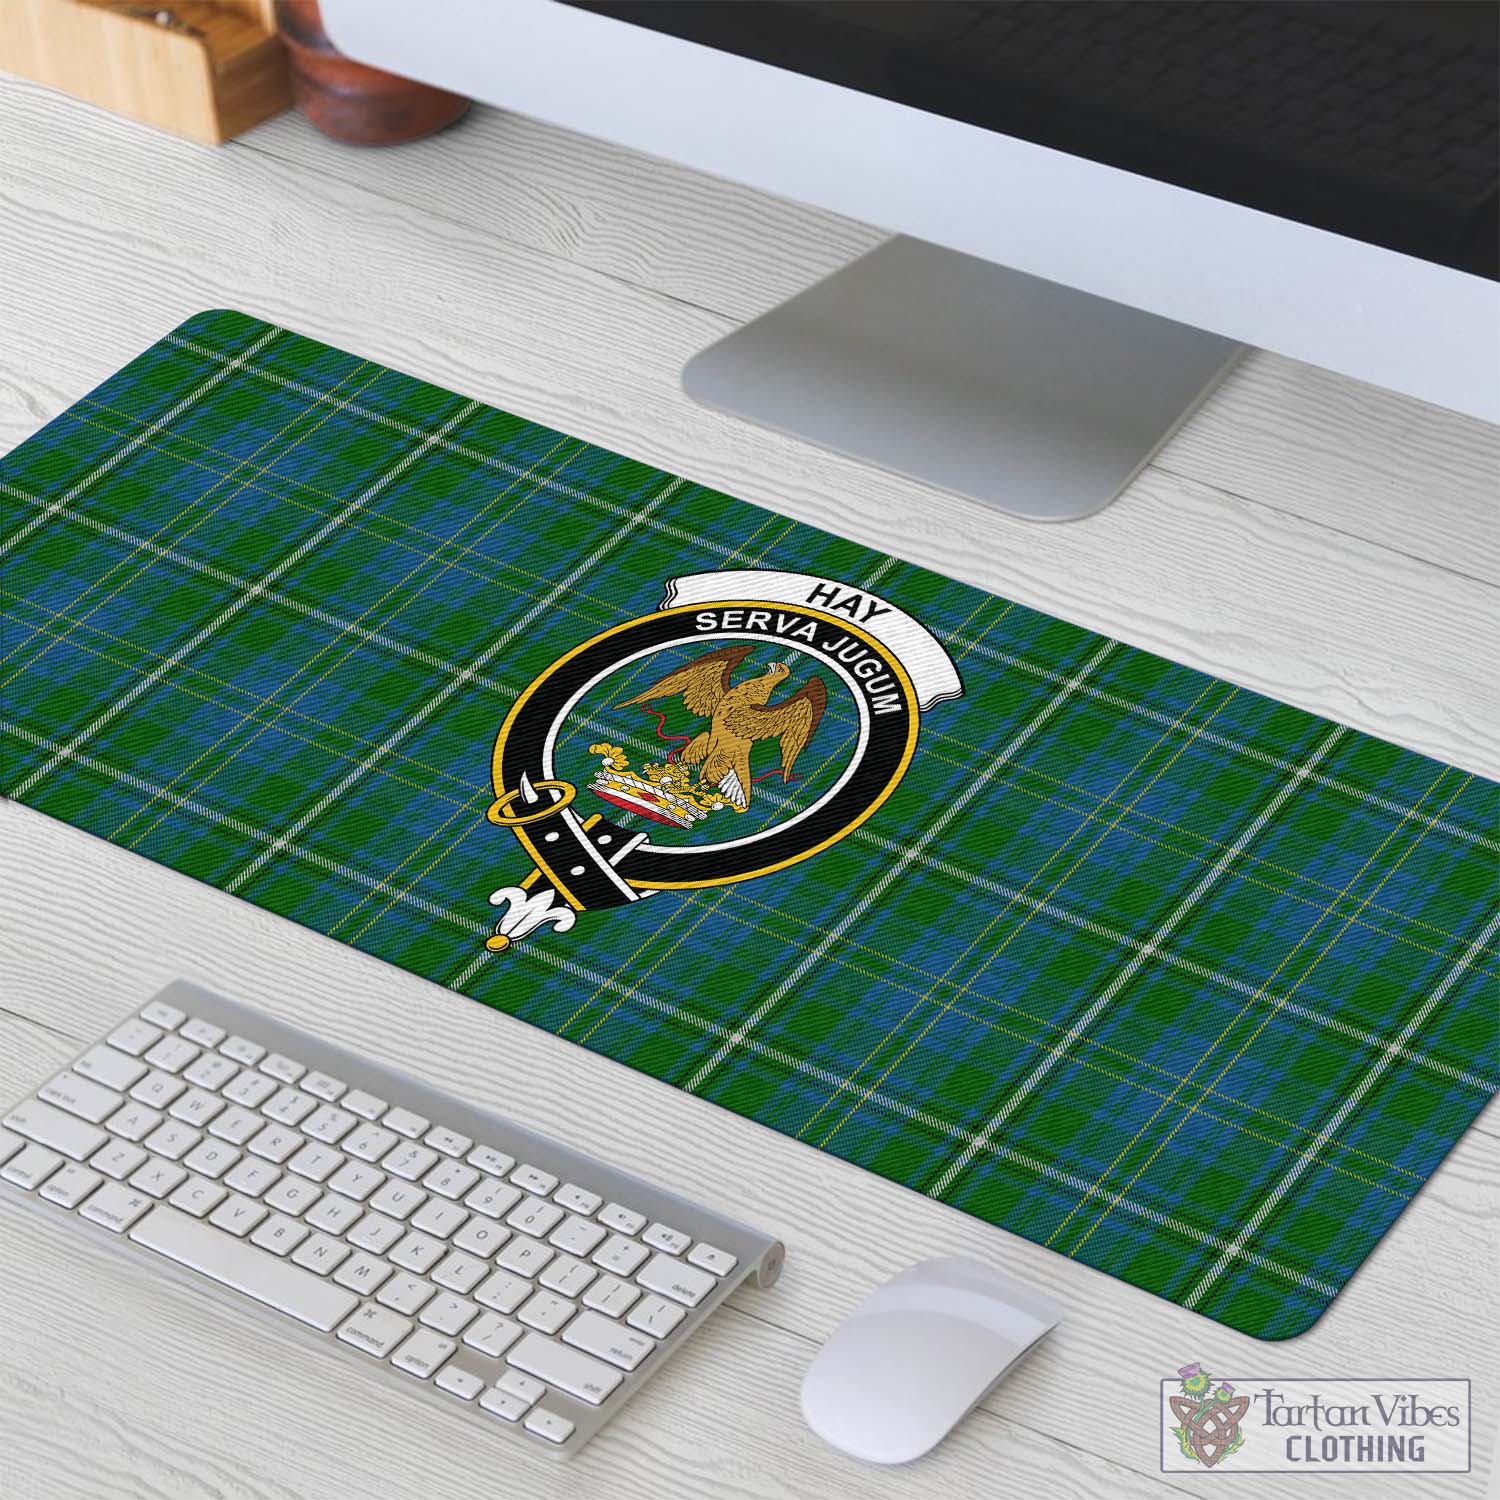 Tartan Vibes Clothing Hay Hunting Tartan Mouse Pad with Family Crest